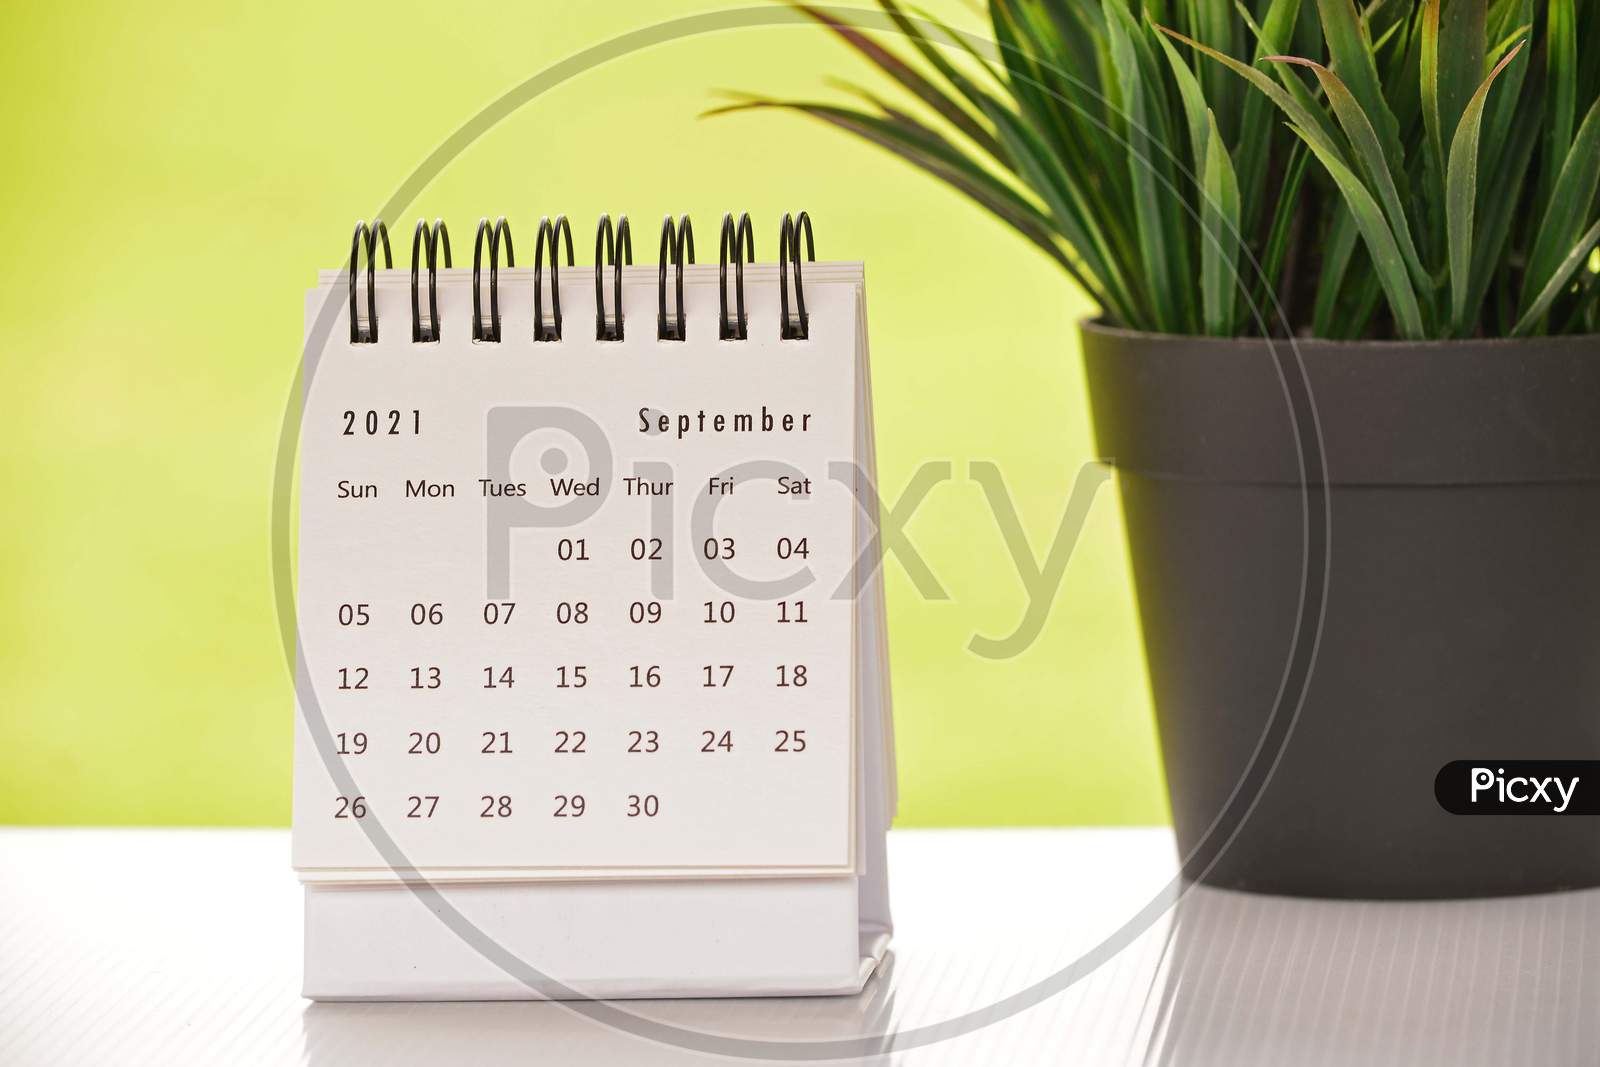 White September 2021 Calendar With Green Backgrounds And Potted Plant. 2021 New Year Concept